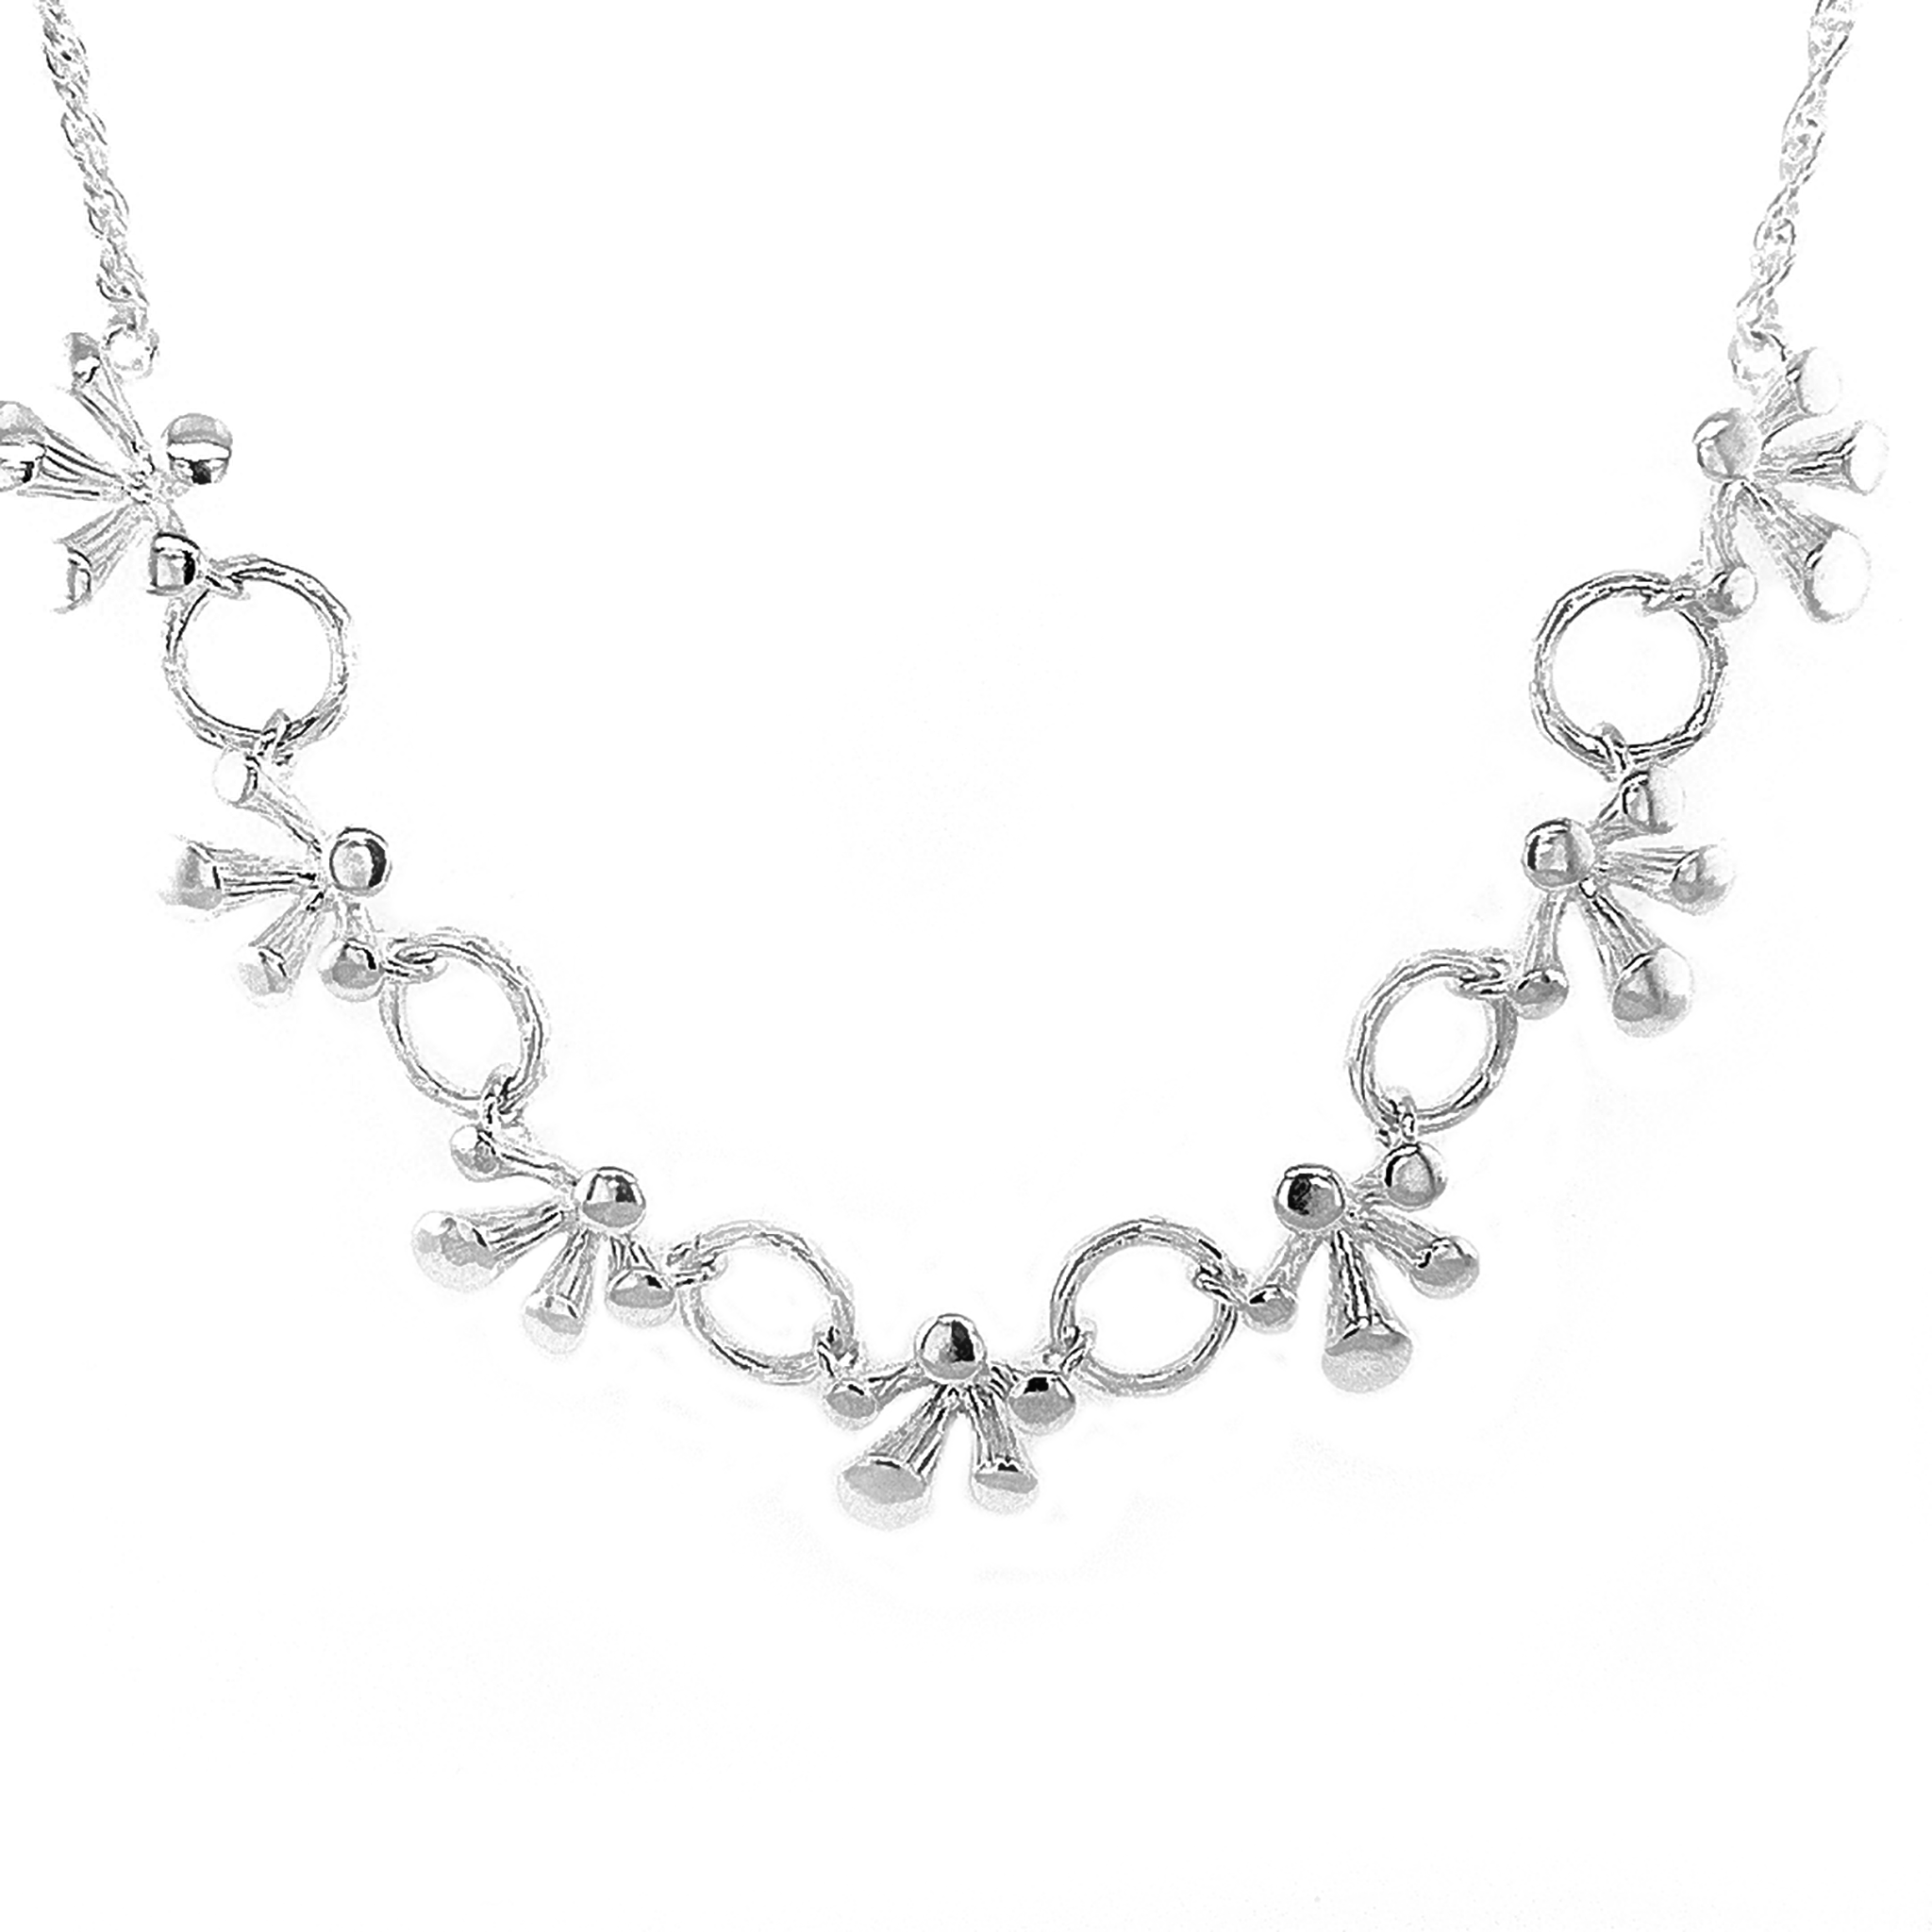 Silver Splat Chain Necklace